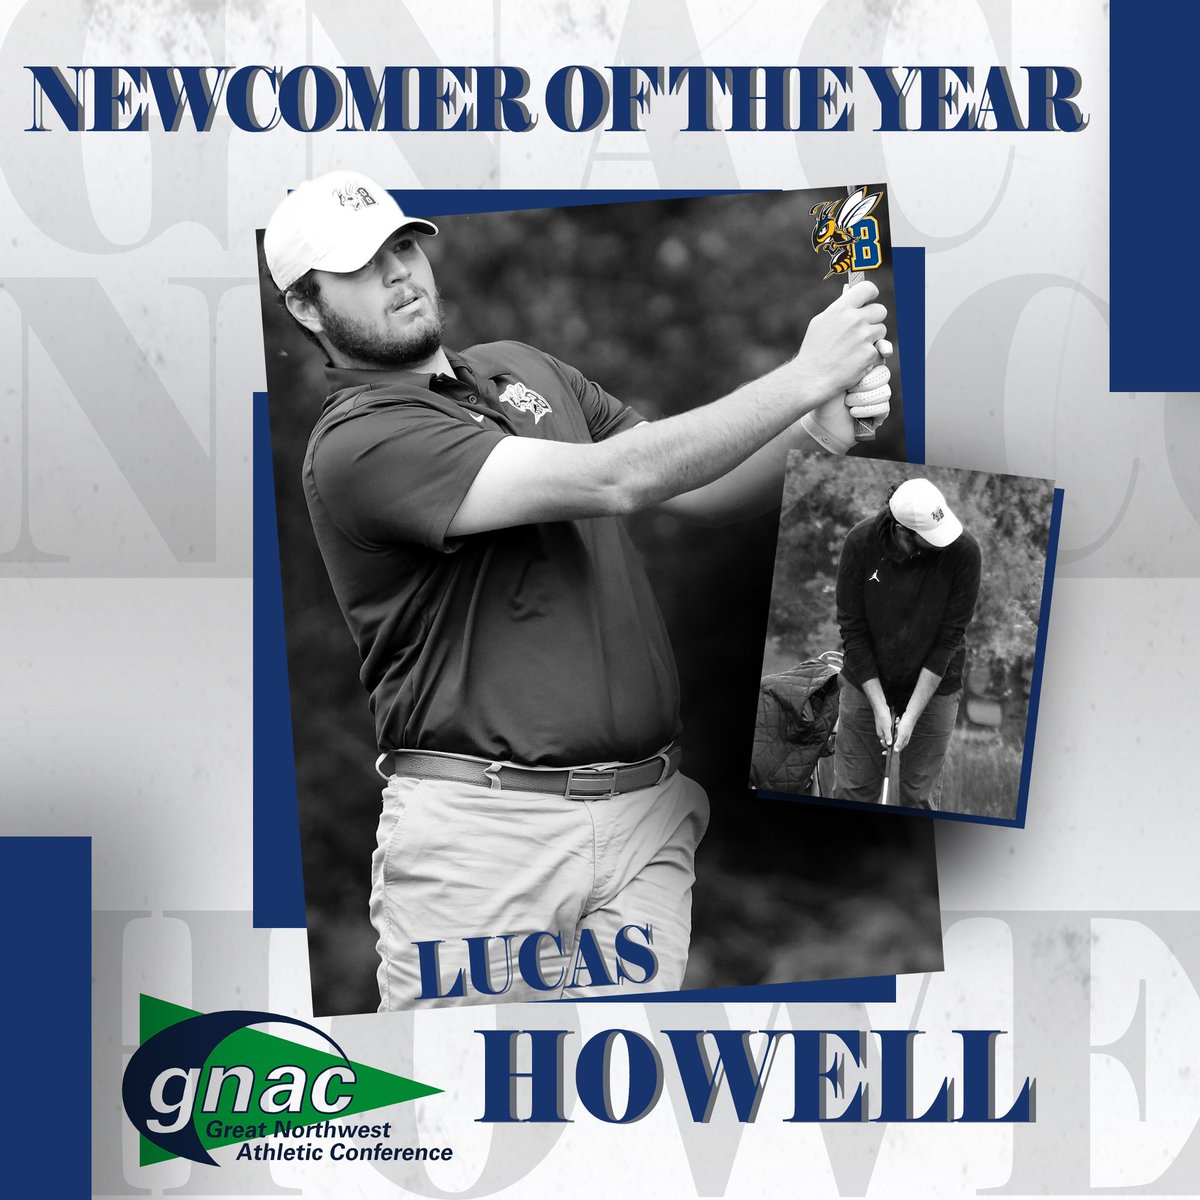 Congratulations to Lucas Howell on being named GNAC Men’s Golf Newcomer of the Year❗️

#msubsports | #msubgolf